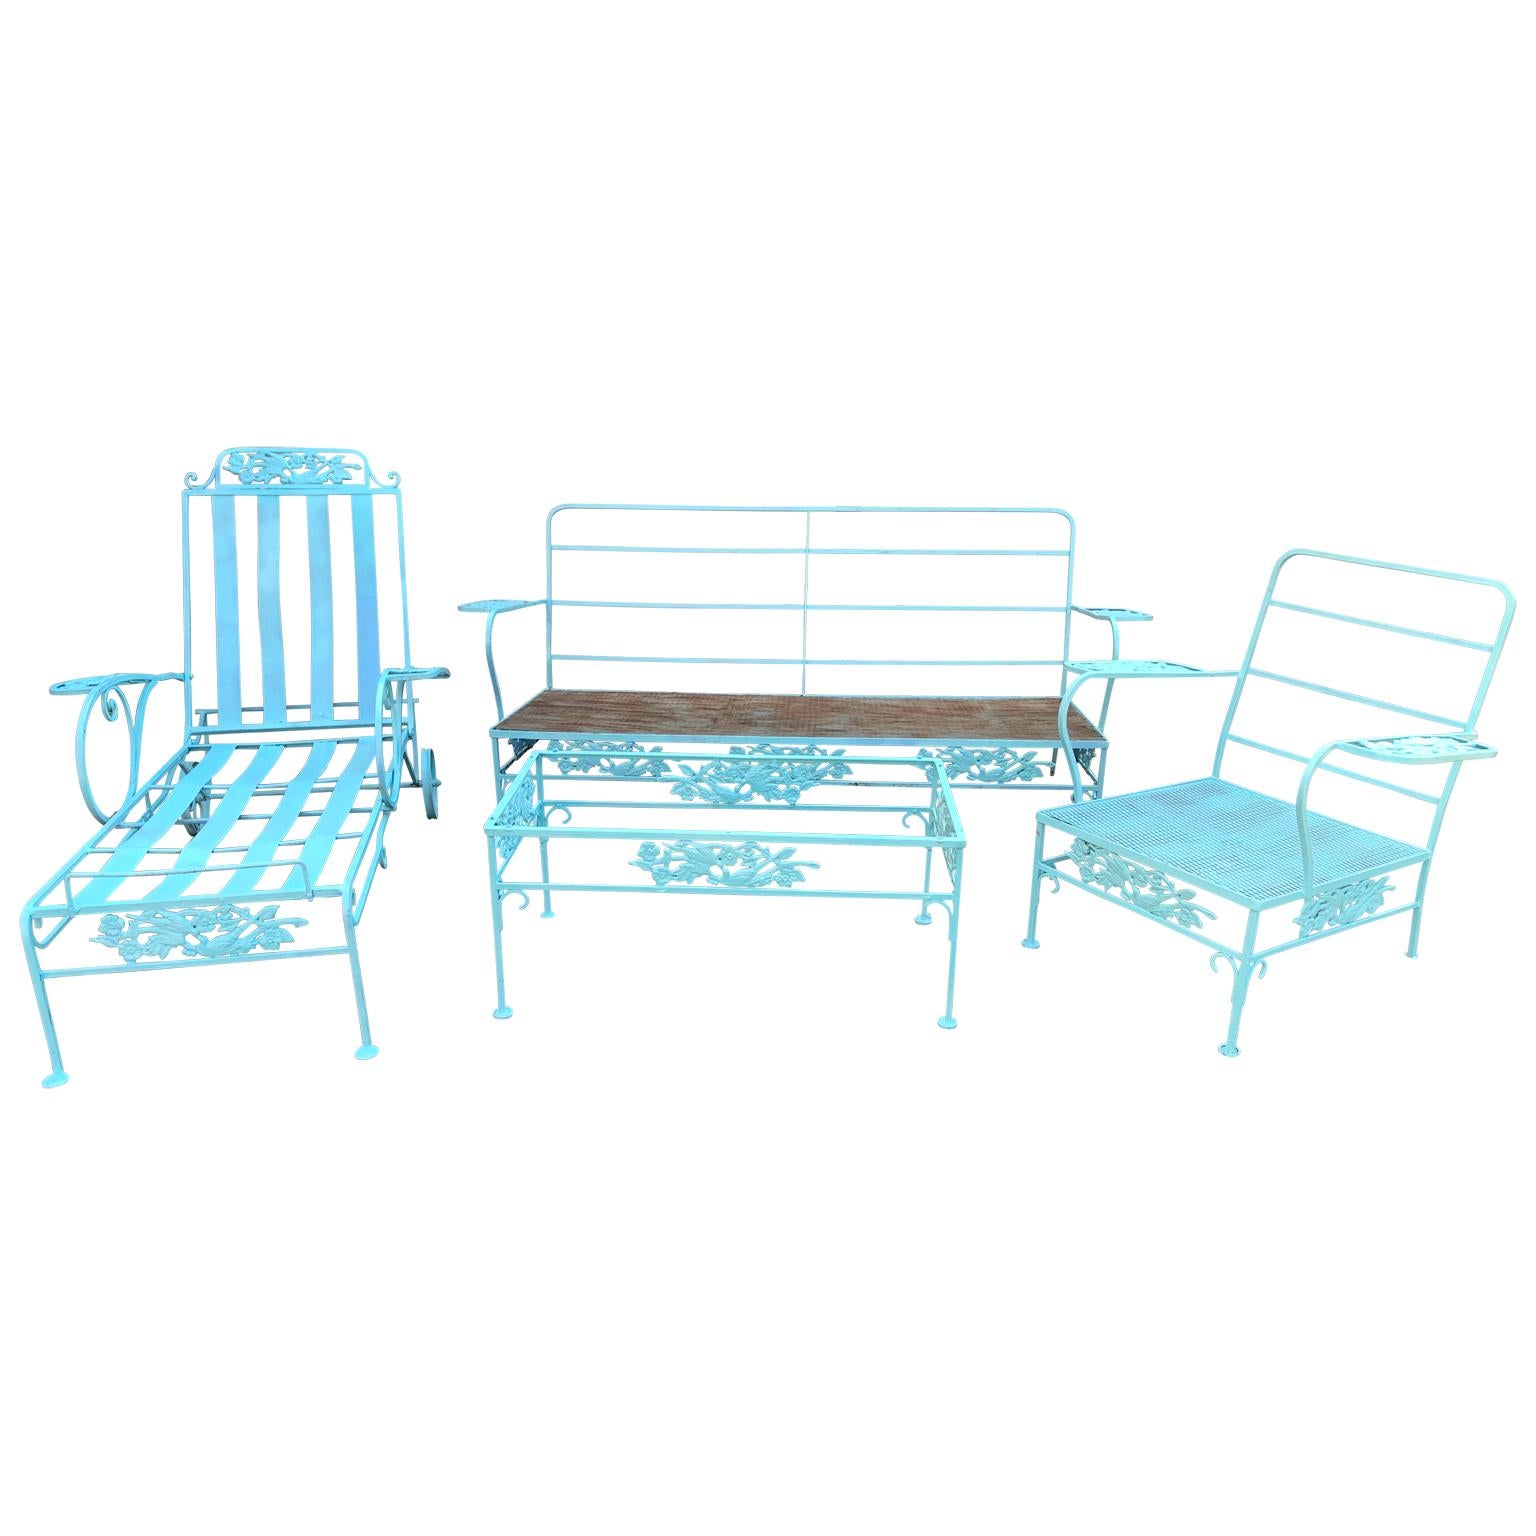 Late Victorian Victorian Set Of Turquoise Painted Iron Garden Table, Sofa, Chaise And Armchair